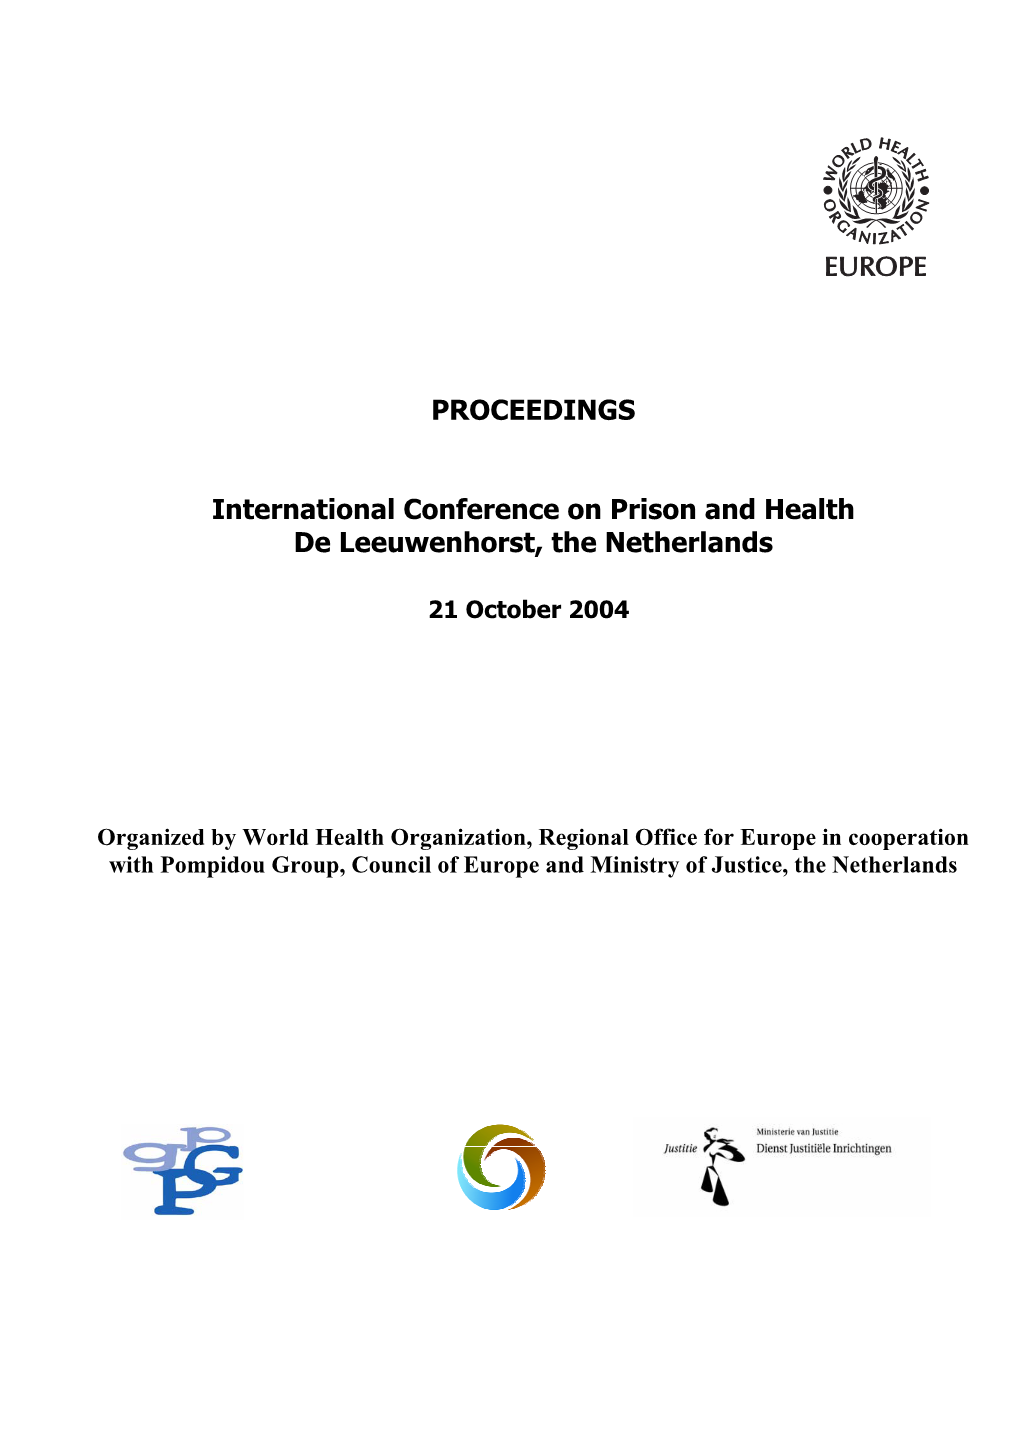 International Conference on Prison and Health, De Leeuwenhorst, The